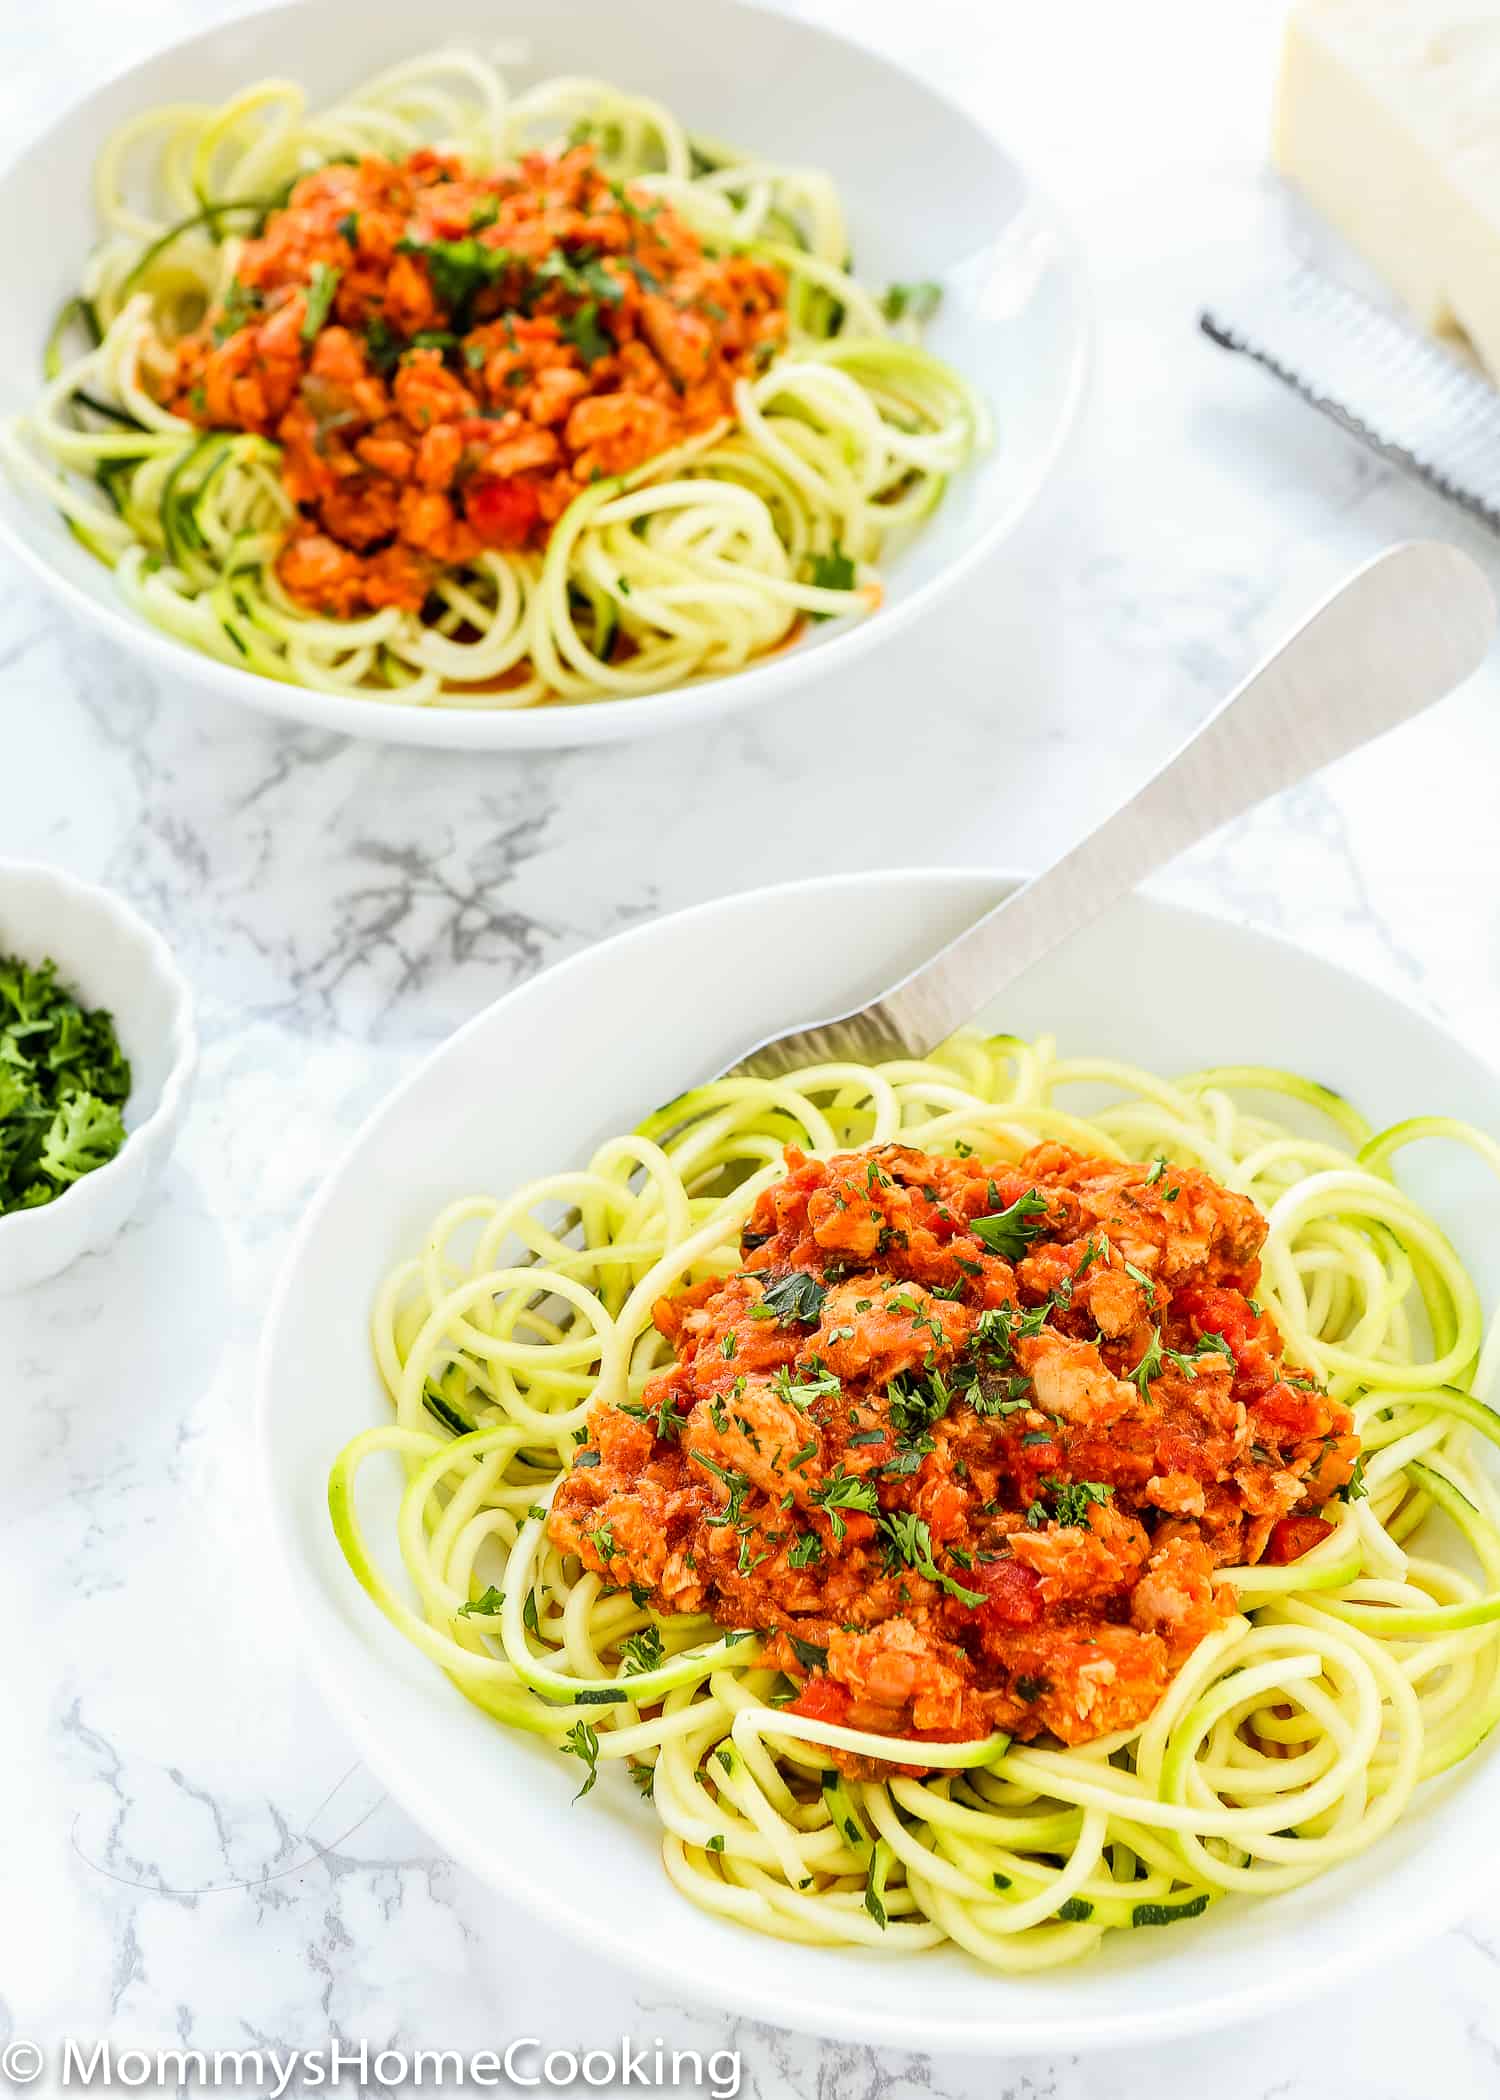 This Easy Tuna Ragu recipe is delicious, light and healthy yet full of robust flavors. It’s ridiculously easy to make and everything is cooked in one pan in less than 30 minutes. [Keto Friendly] [Whole 30 Friendly] https://mommyshomecooking.com